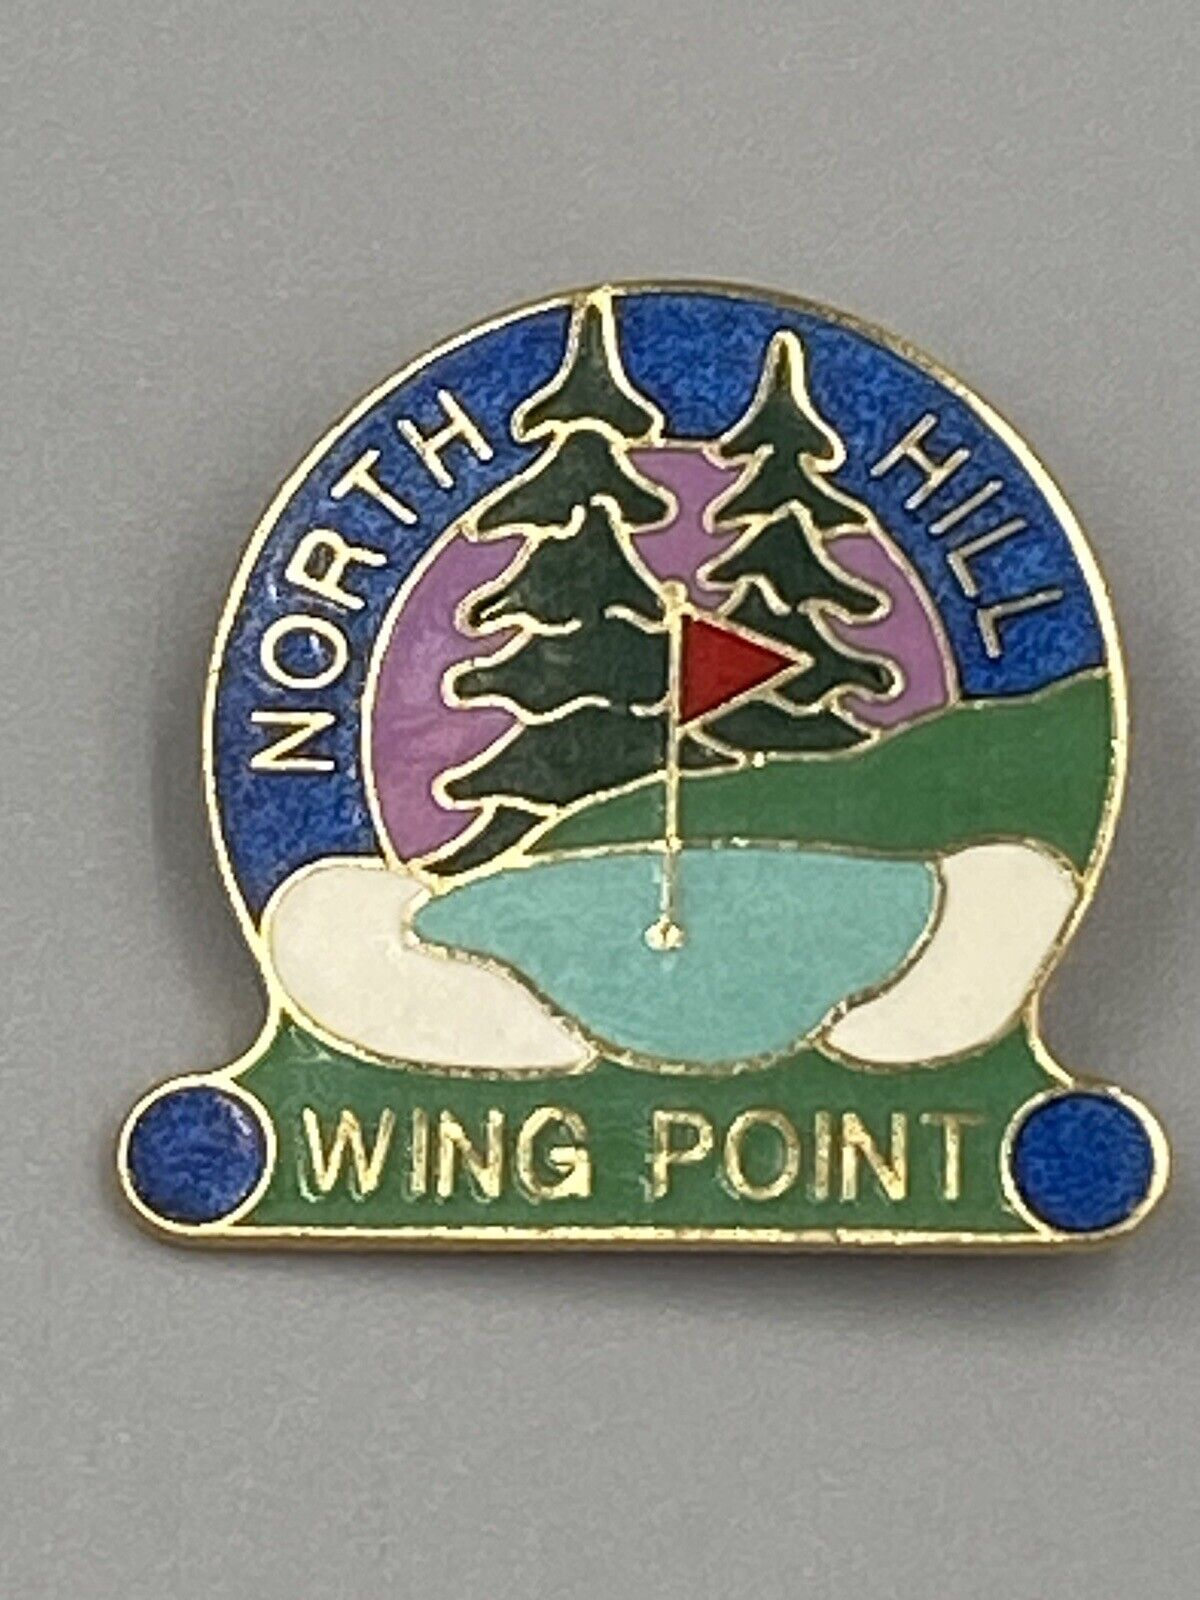 Vintage 1989 North Hill Wing Point Wingpoint Lapel Pin Brooch